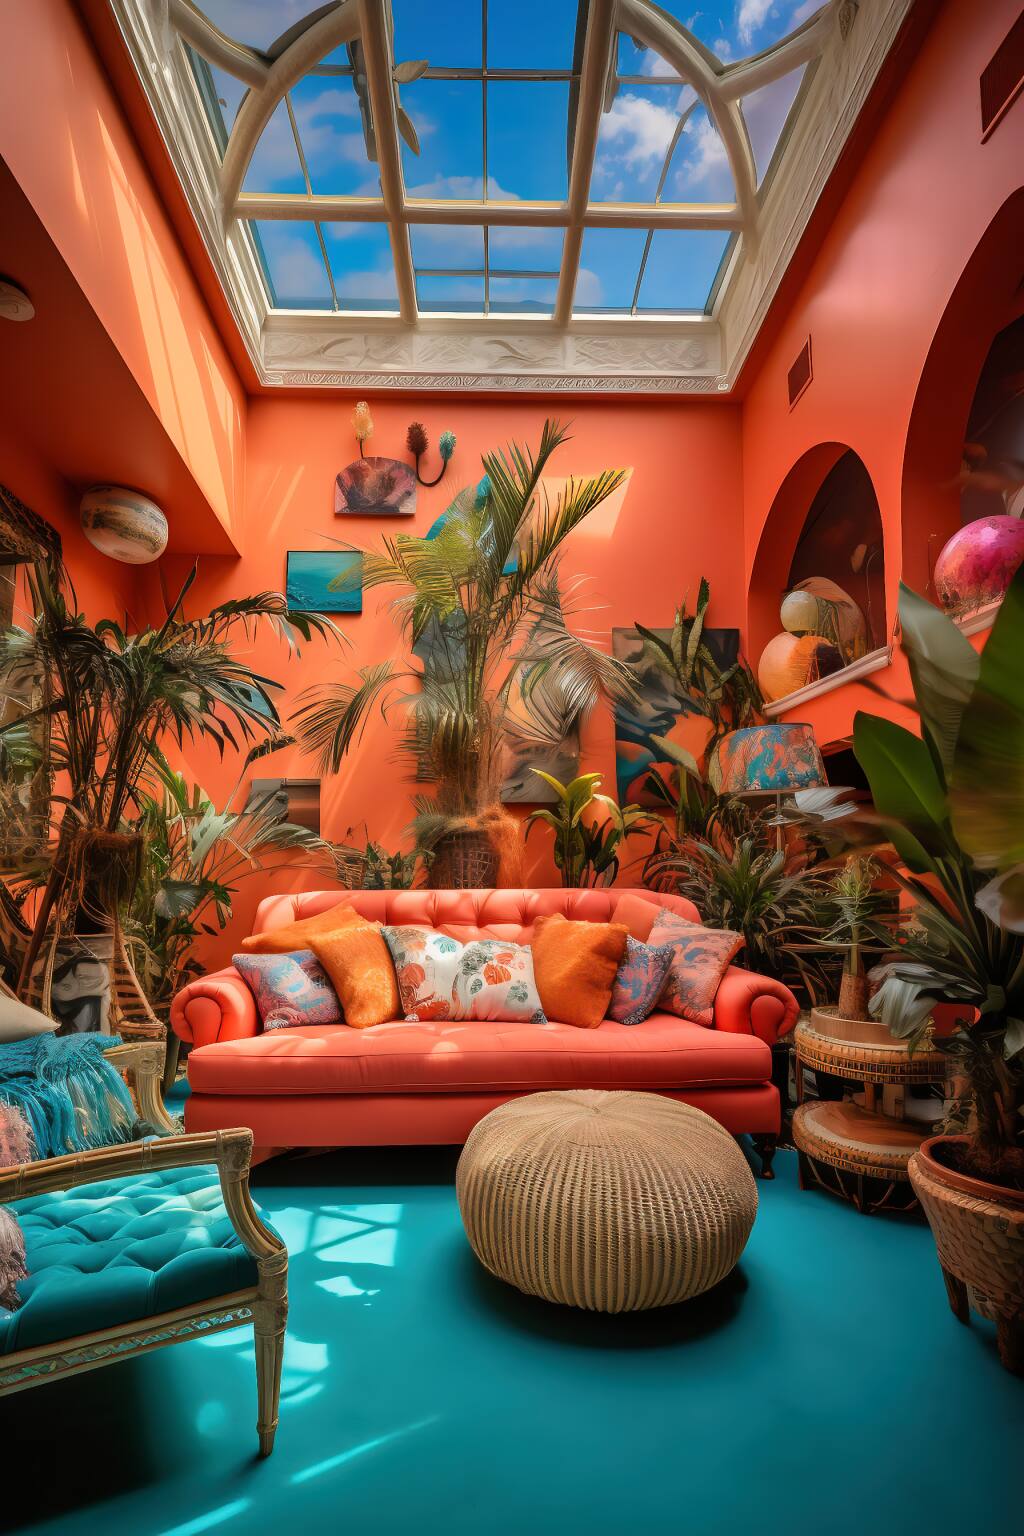 Tropical Bohemian Living Room In Teal And Coral, Featuring Bamboo Chairs, Tassel Throw Pillows, And Leafy Indoor Plants.